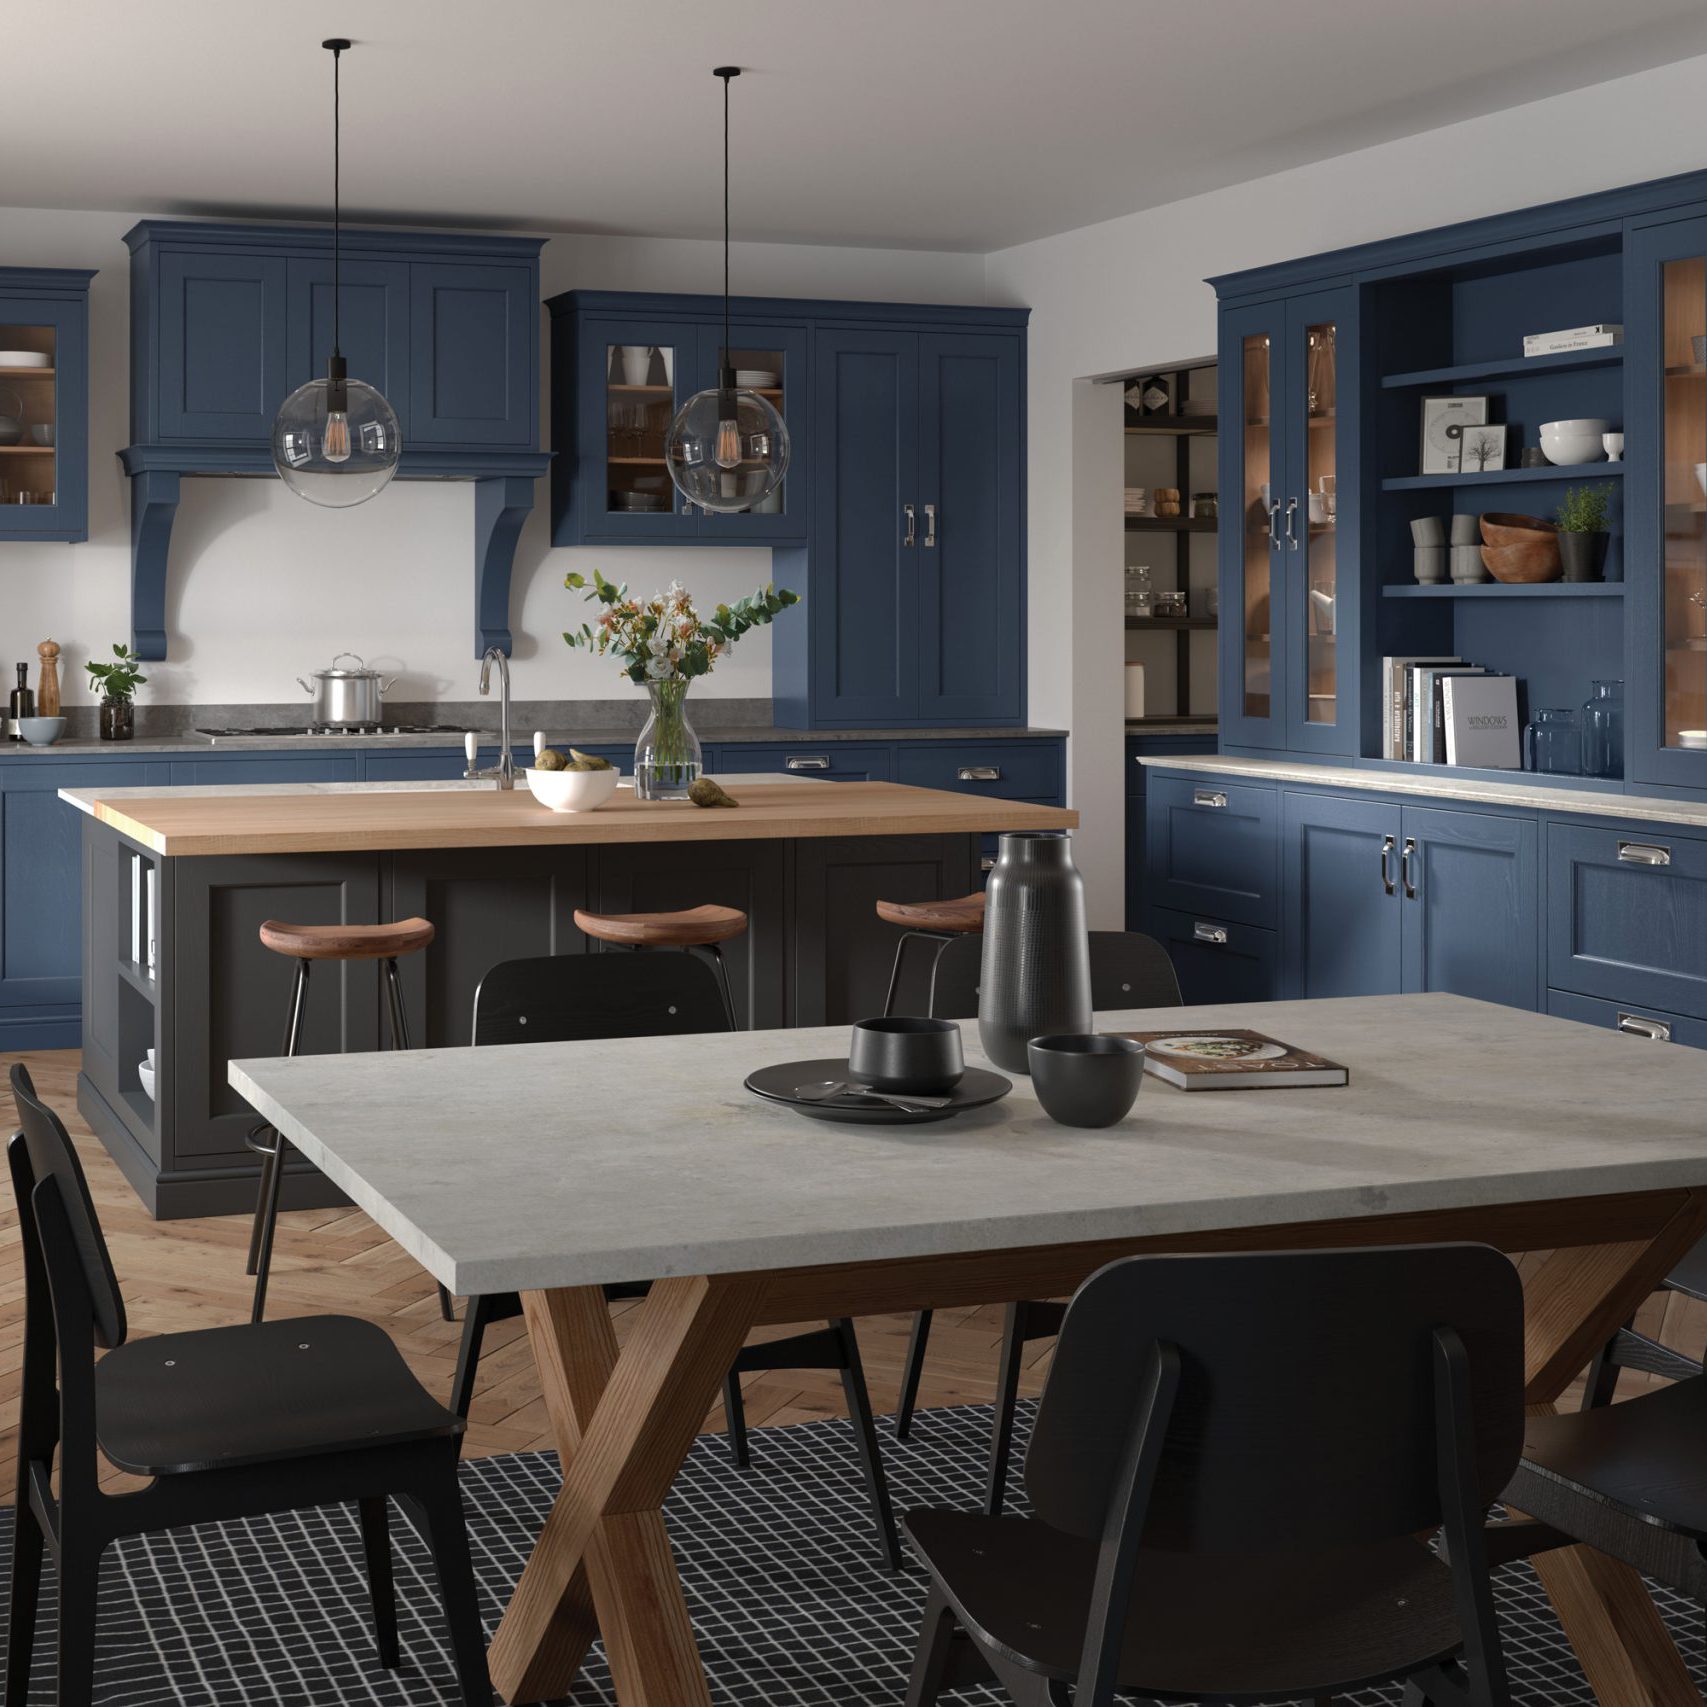 Mid blue and grey shaker kitchen with dining table and chairs in foreground